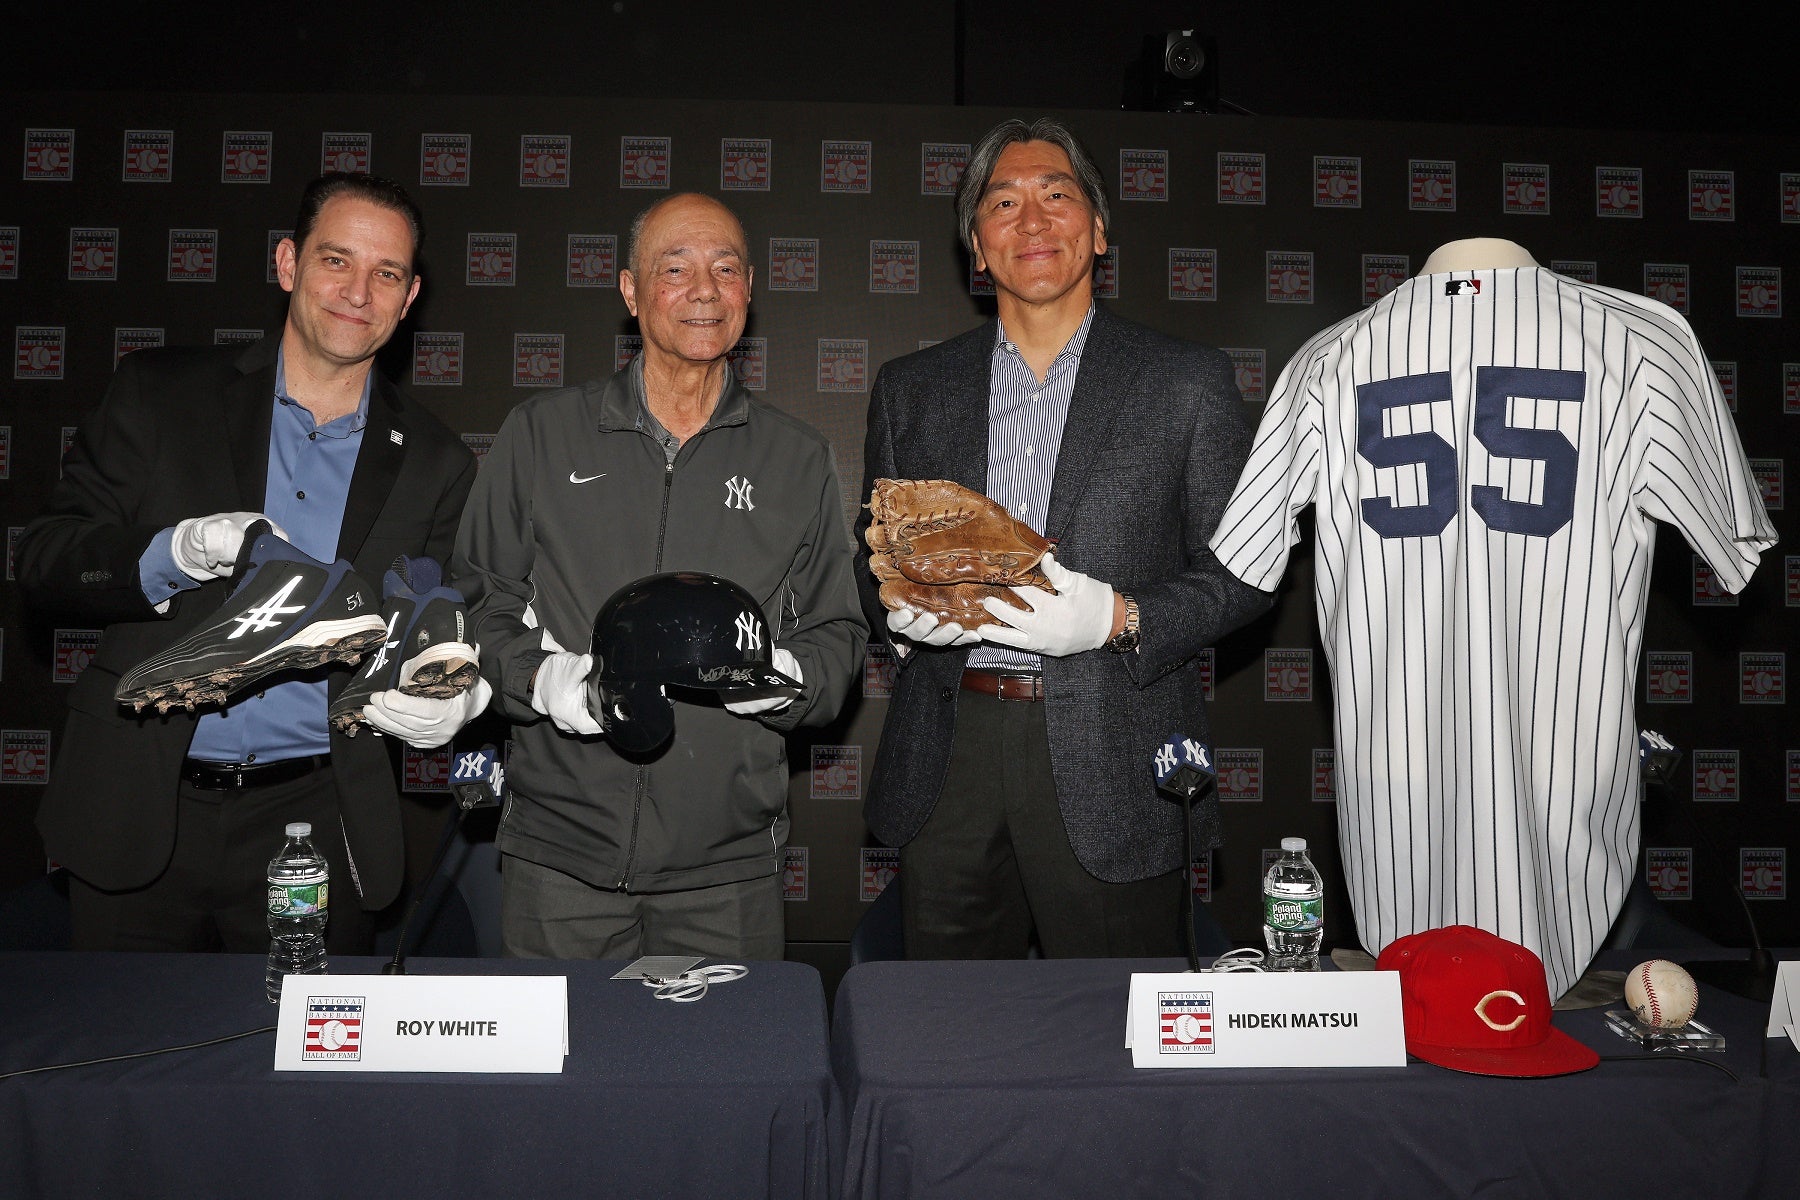 From L to R: Hall of Fame President Josh Rawitch, Roy White and Hideki Matsui at the Exhibit Announcement at Yankee Stadium